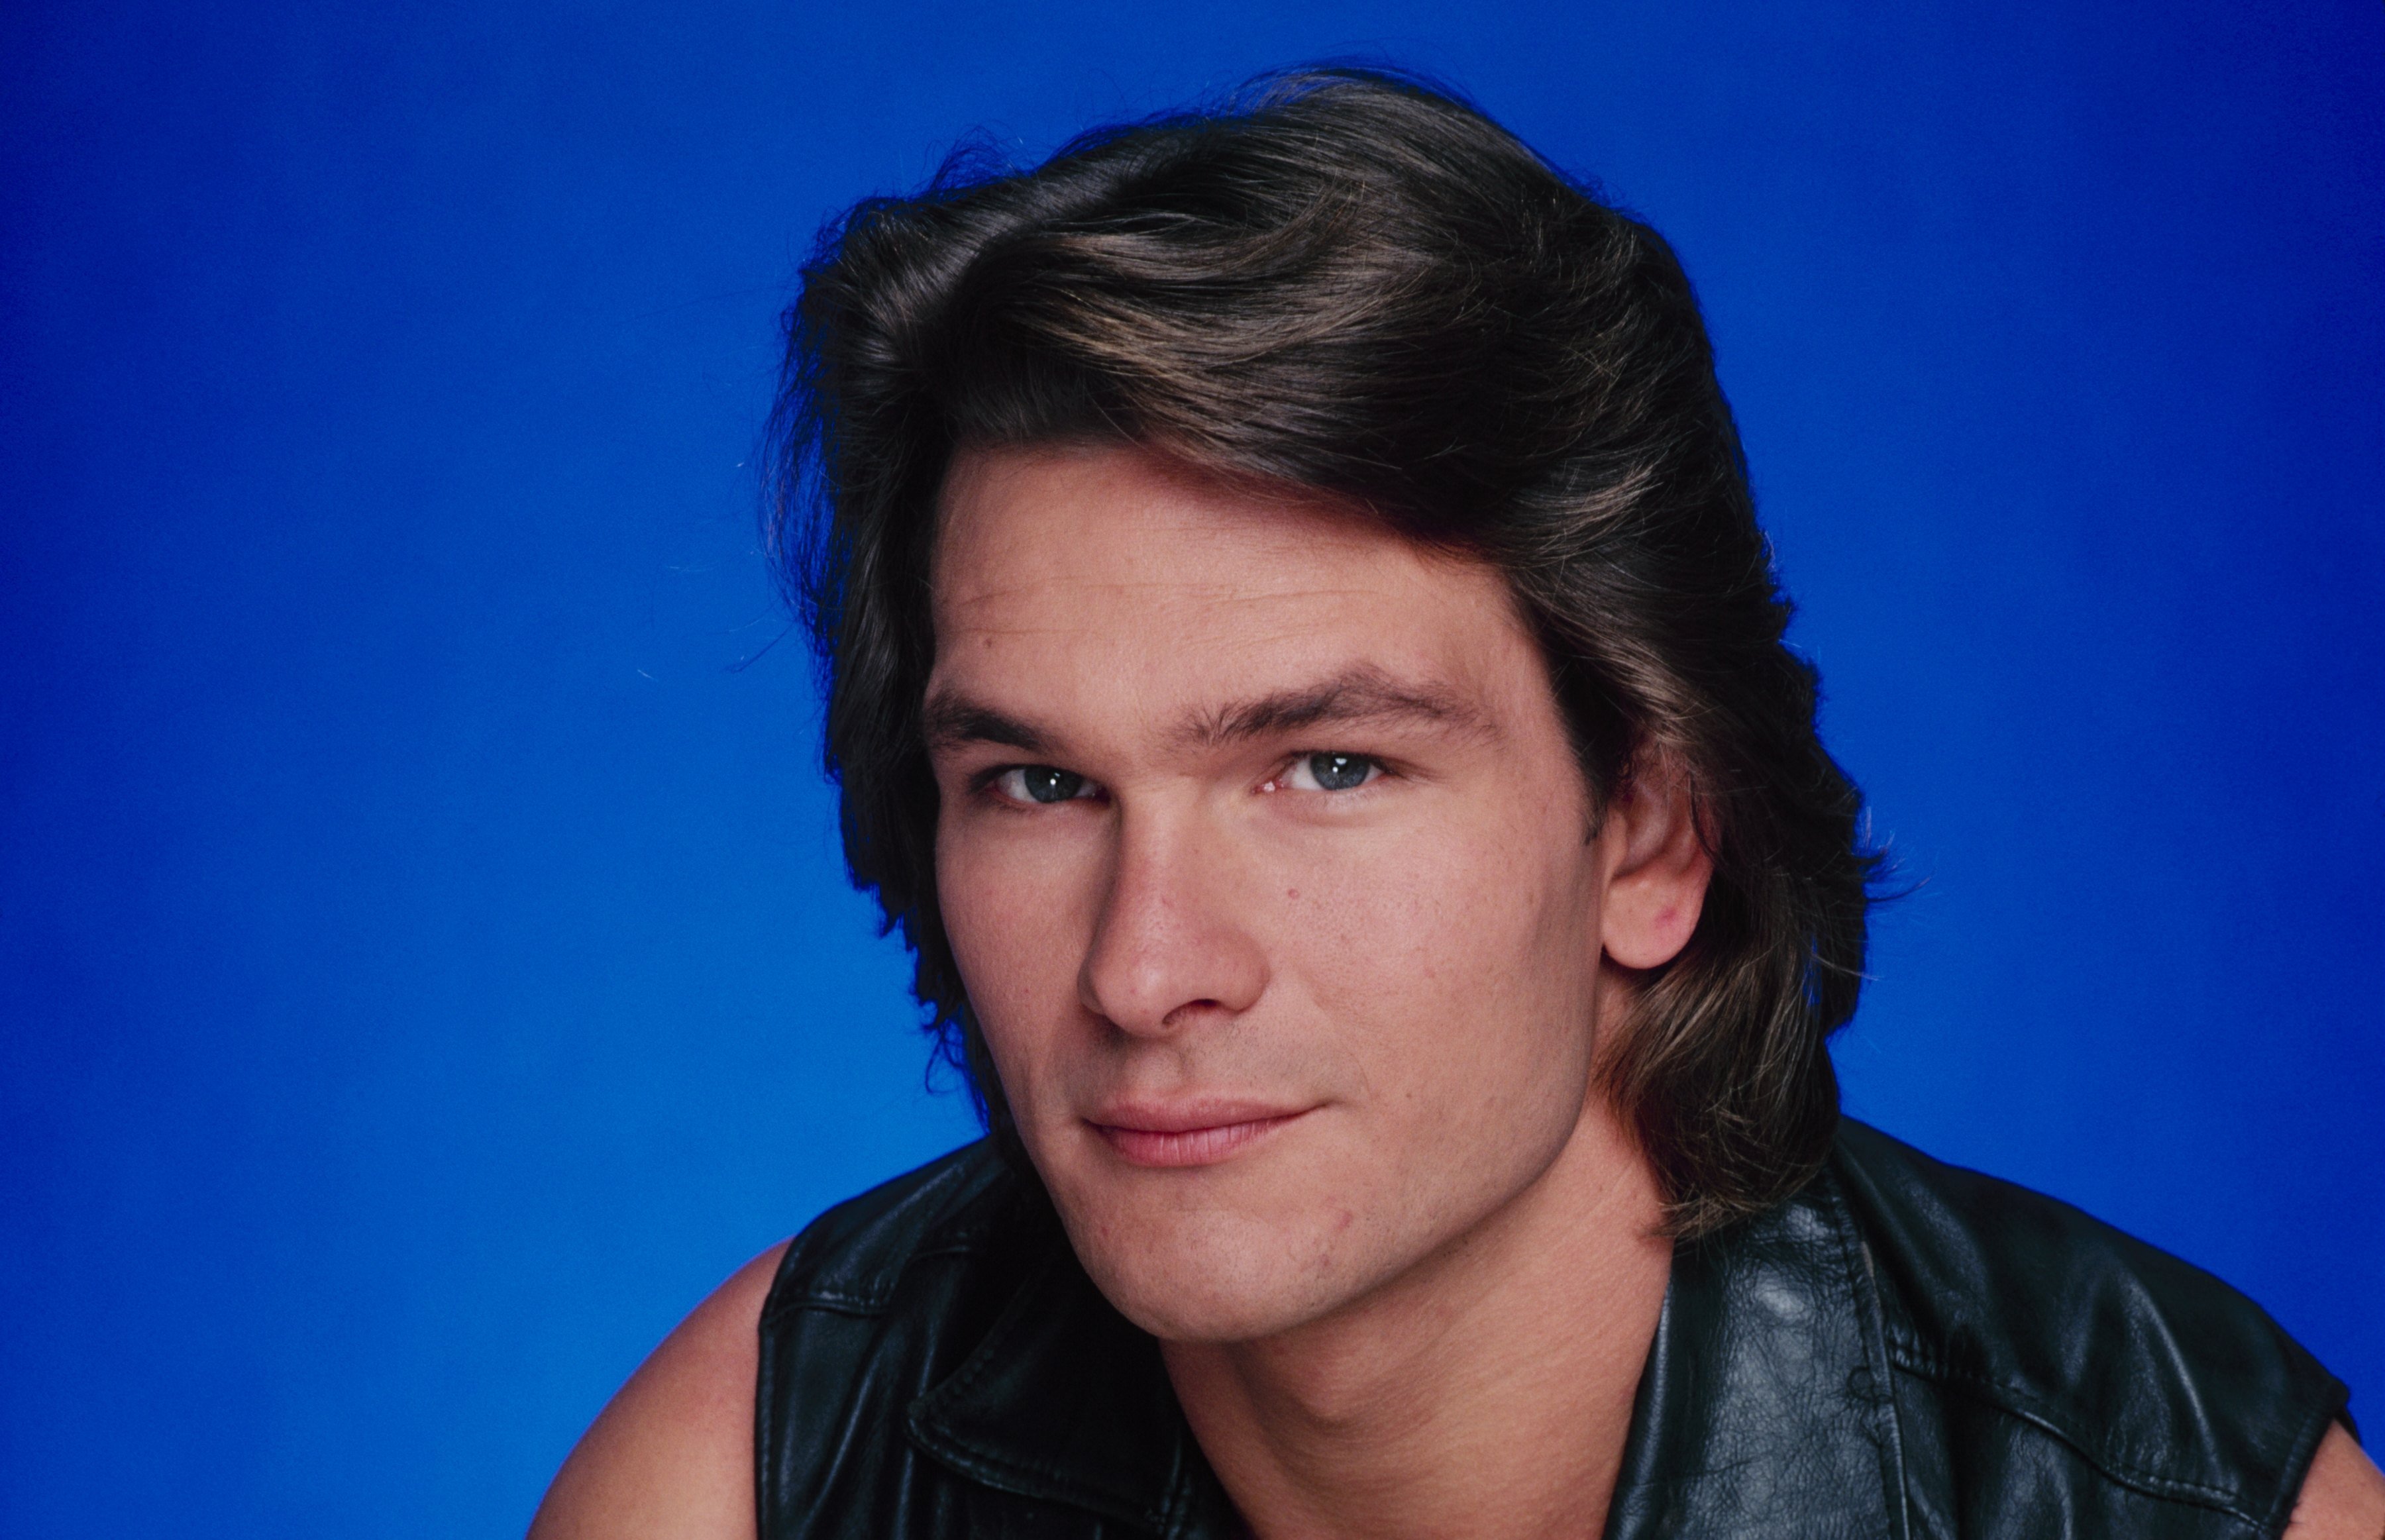 A portrait of the actor Patrick Swayze, in 1982. | Photo: Getty Images